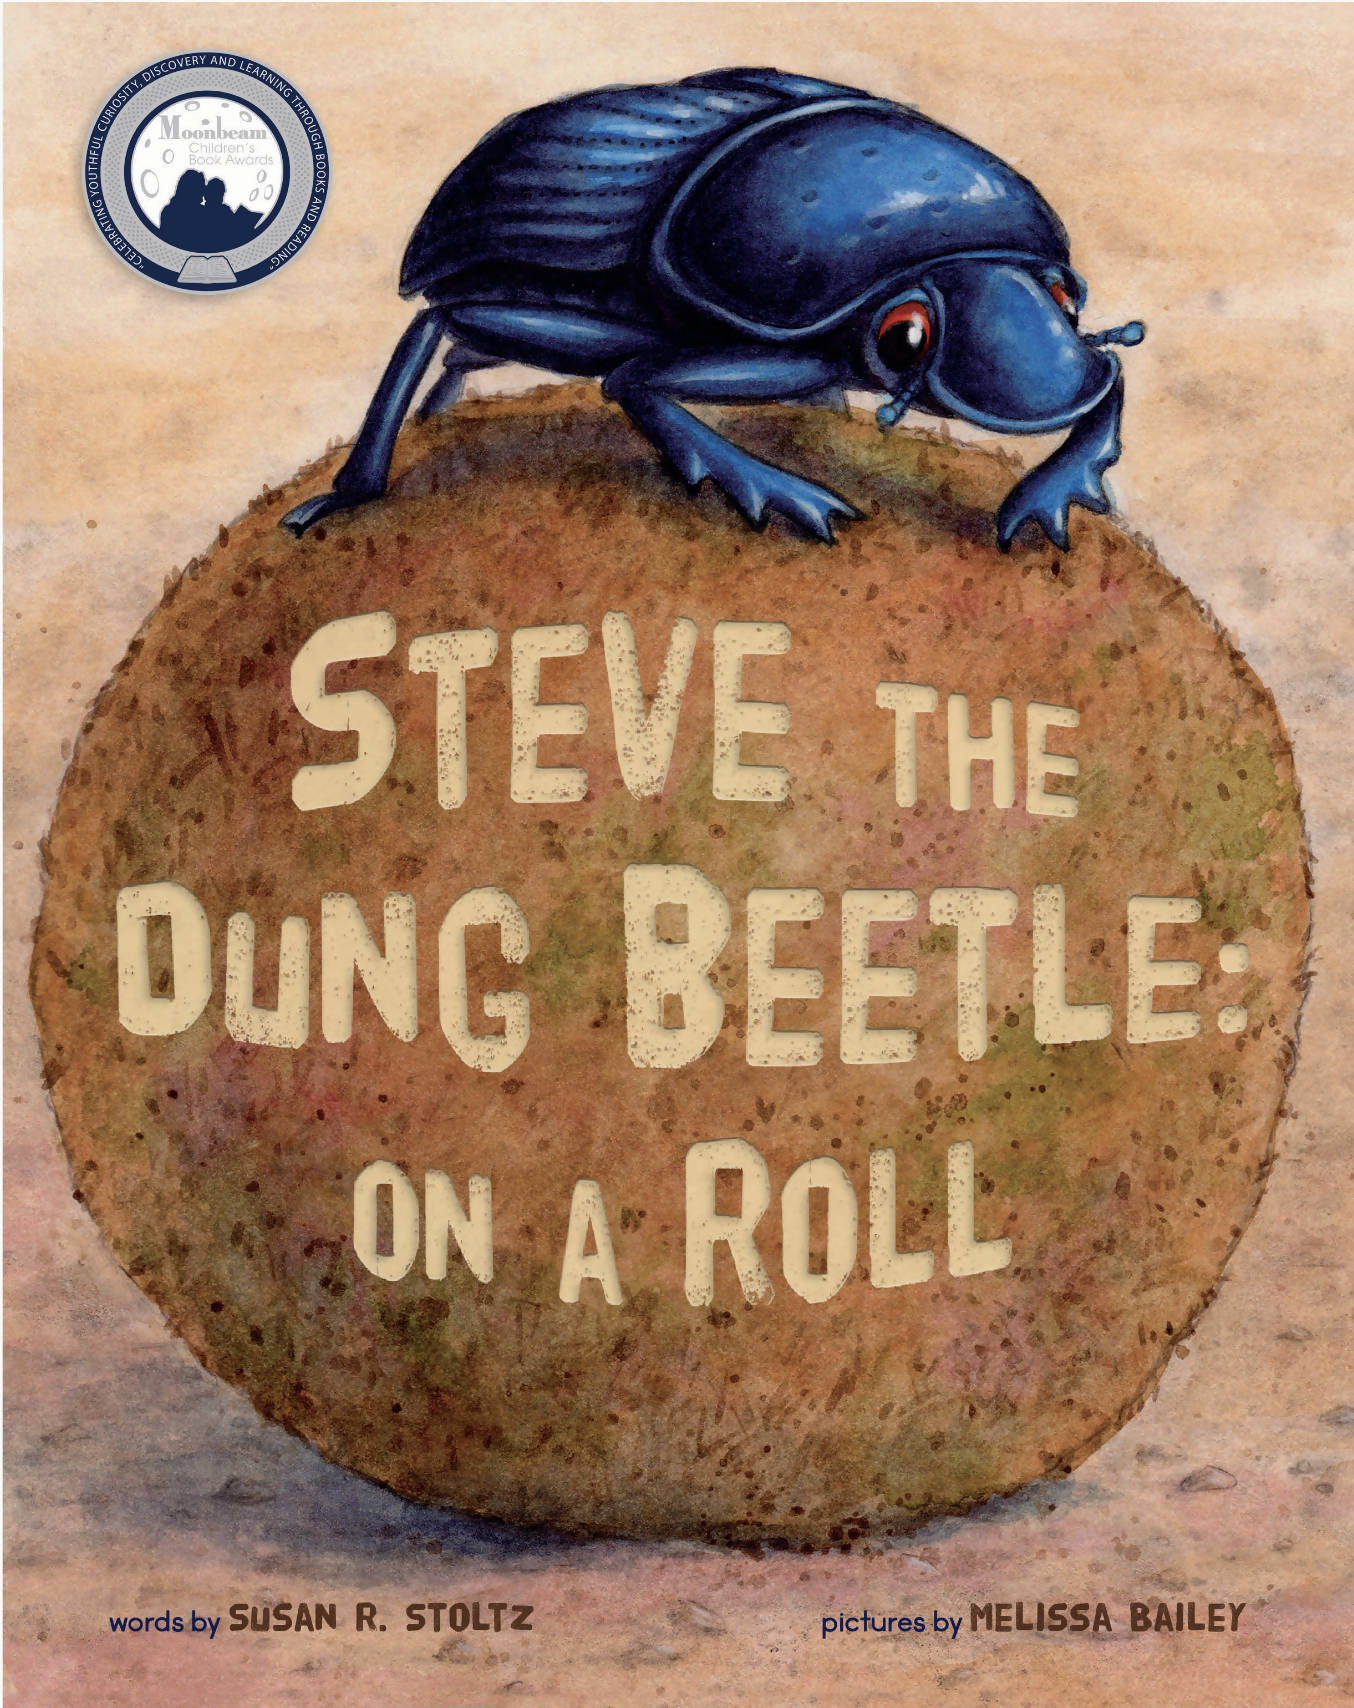 Steve The Dung Beetle: On A Roll